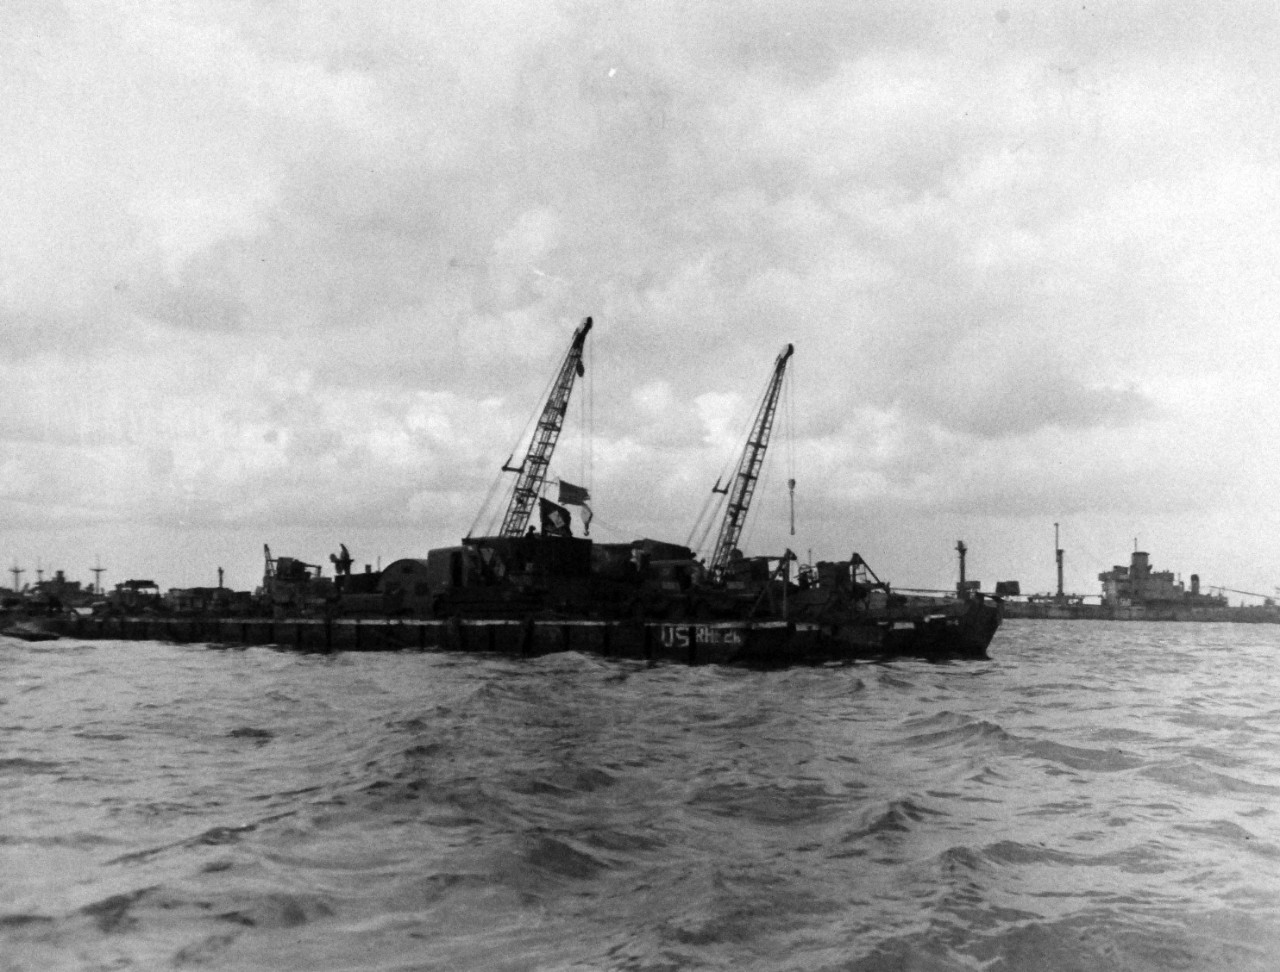 80-G-285125:  Normandy Invasion, Mulberries, June 1944.   Rhino barges carrying equipment to invasion beach of Normandy, France.  In background is a section of “Gooseberry,” purposely sunk ships forming part of the “Mulberry,” the man-made harbor.  Photograph released November 7, 1944.  U.S. Navy photograph, now in the collections of the National Archives.  (2016/03/15).